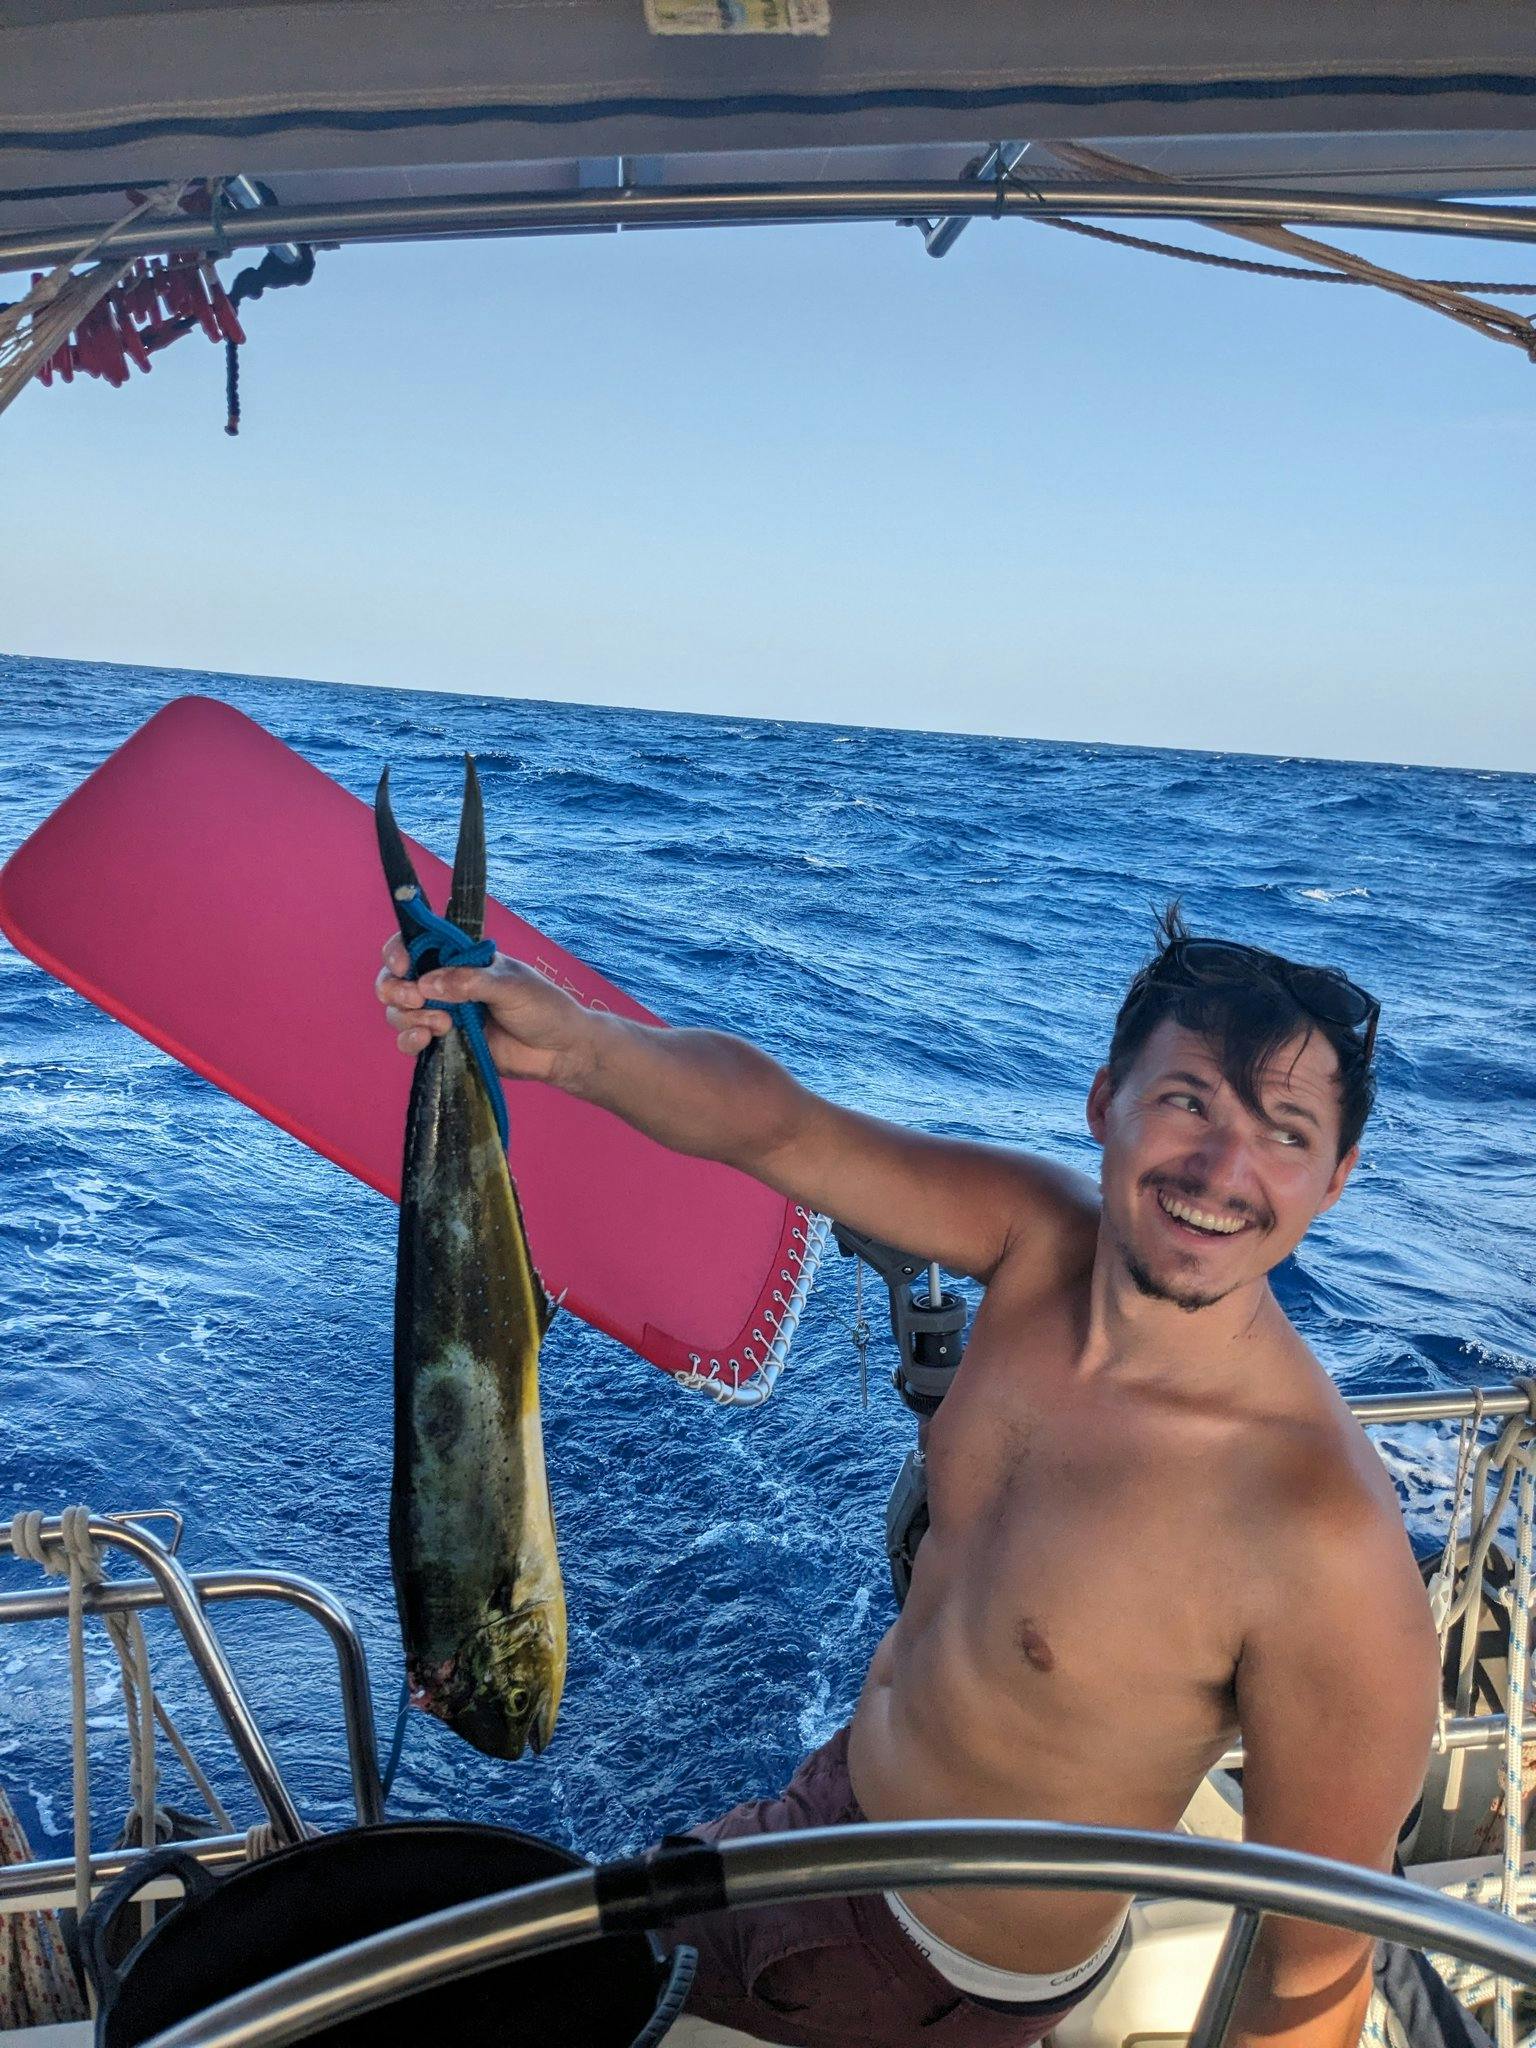 James catching a fish